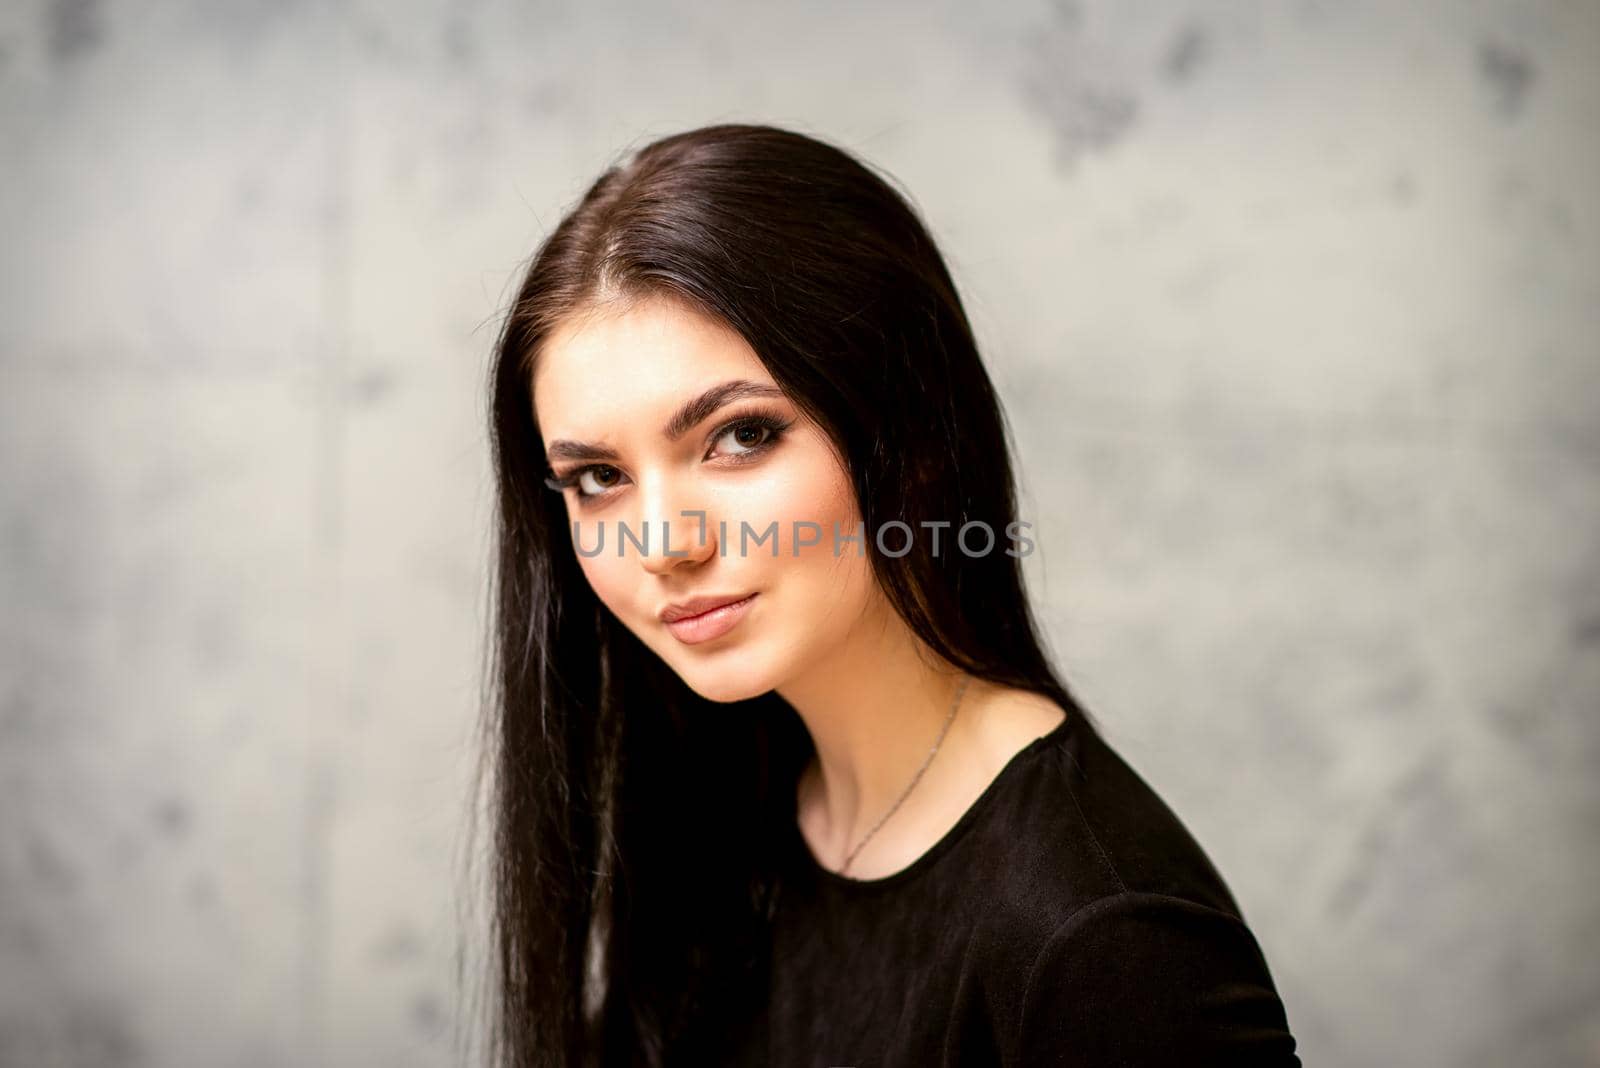 The fashionable young woman. Portrait of the beautiful female model with long hair and makeup. Beauty young caucasian woman with a black hairstyle. by okskukuruza